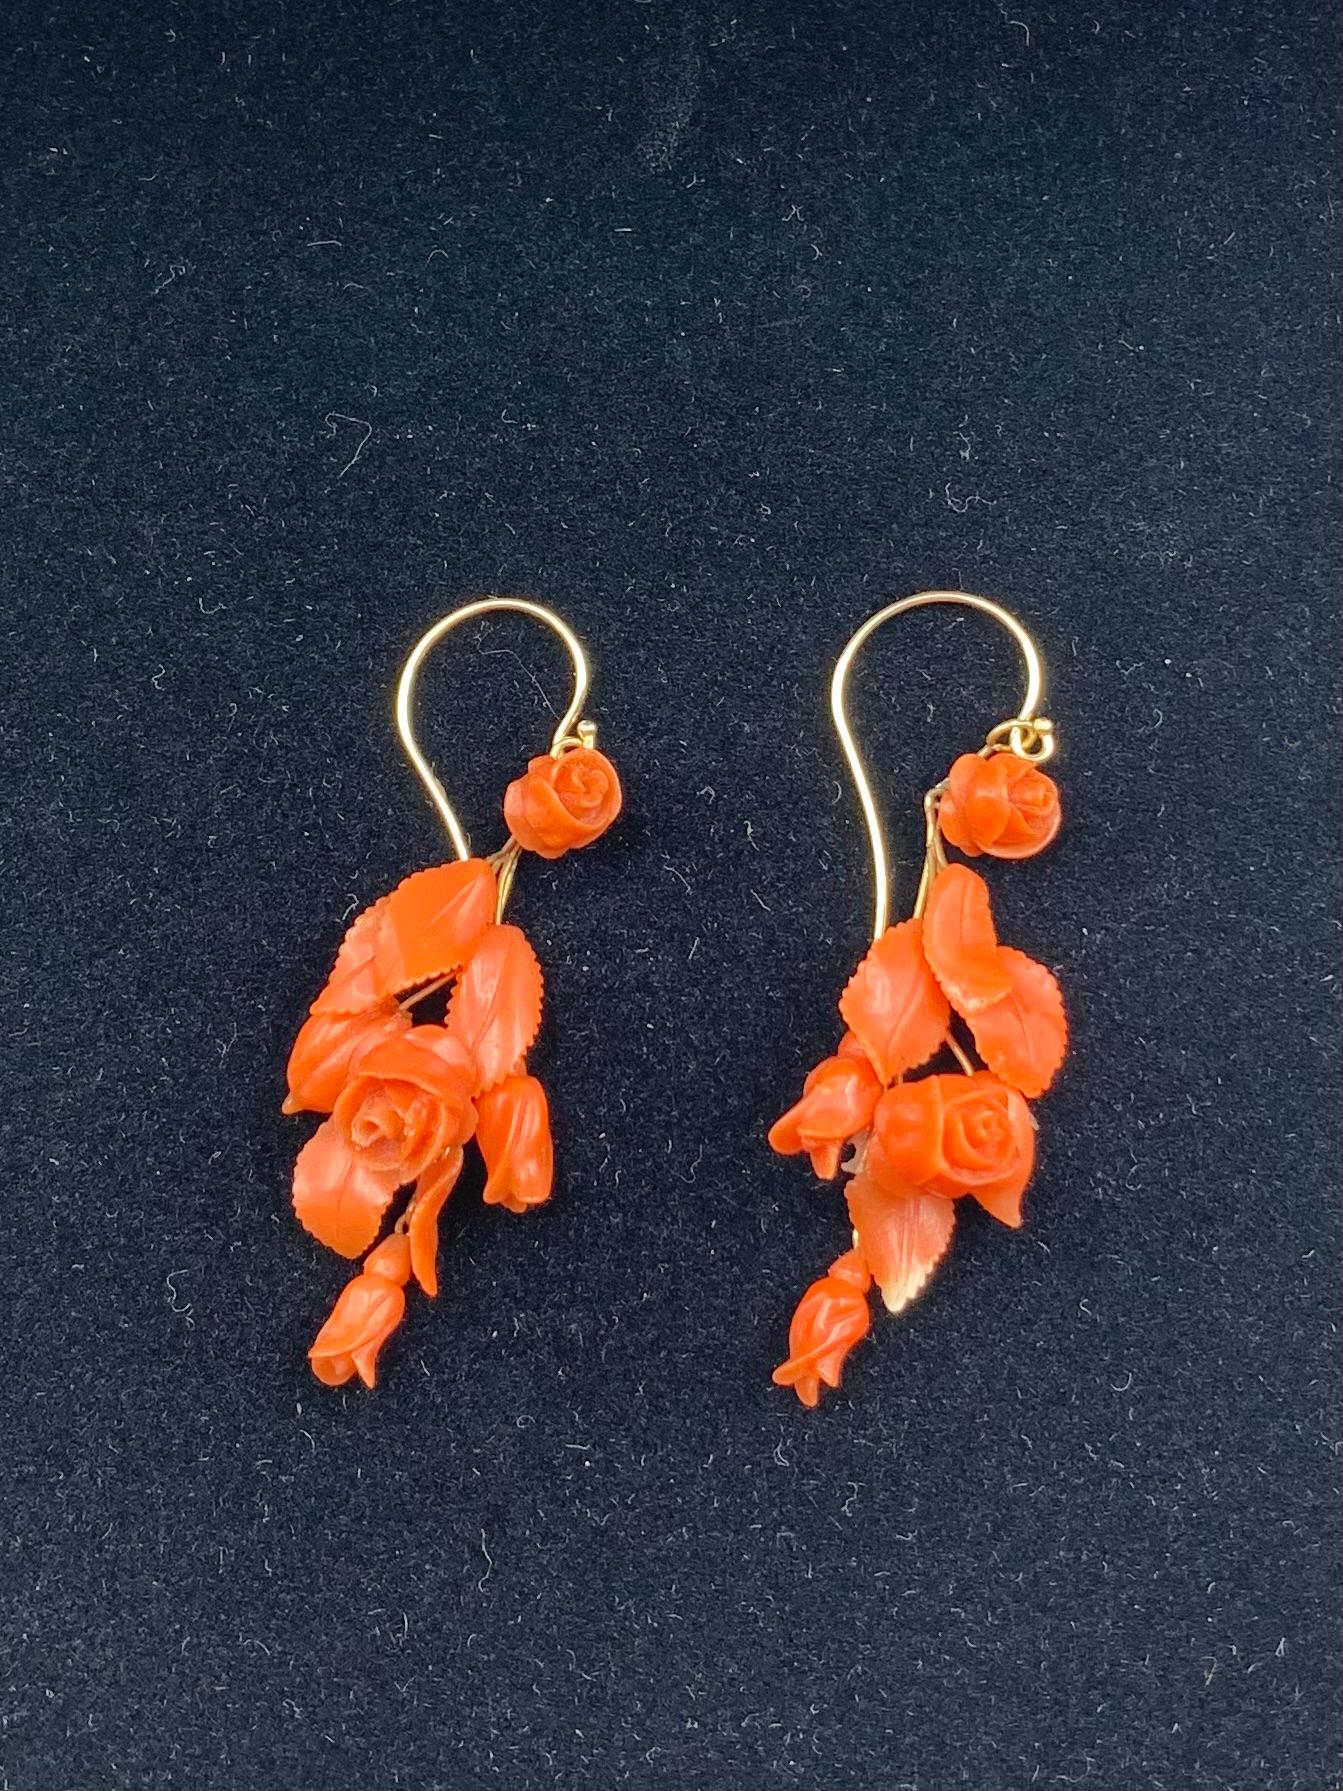 Very fine quality antique carved red coral and 14K yellow gold Rosebud earrings
19th Century
Each earring composed of delicately hand carved coral rosebuds and foliage ideal for a fabulous garden party and this year's Met Gala theme, The Garden of